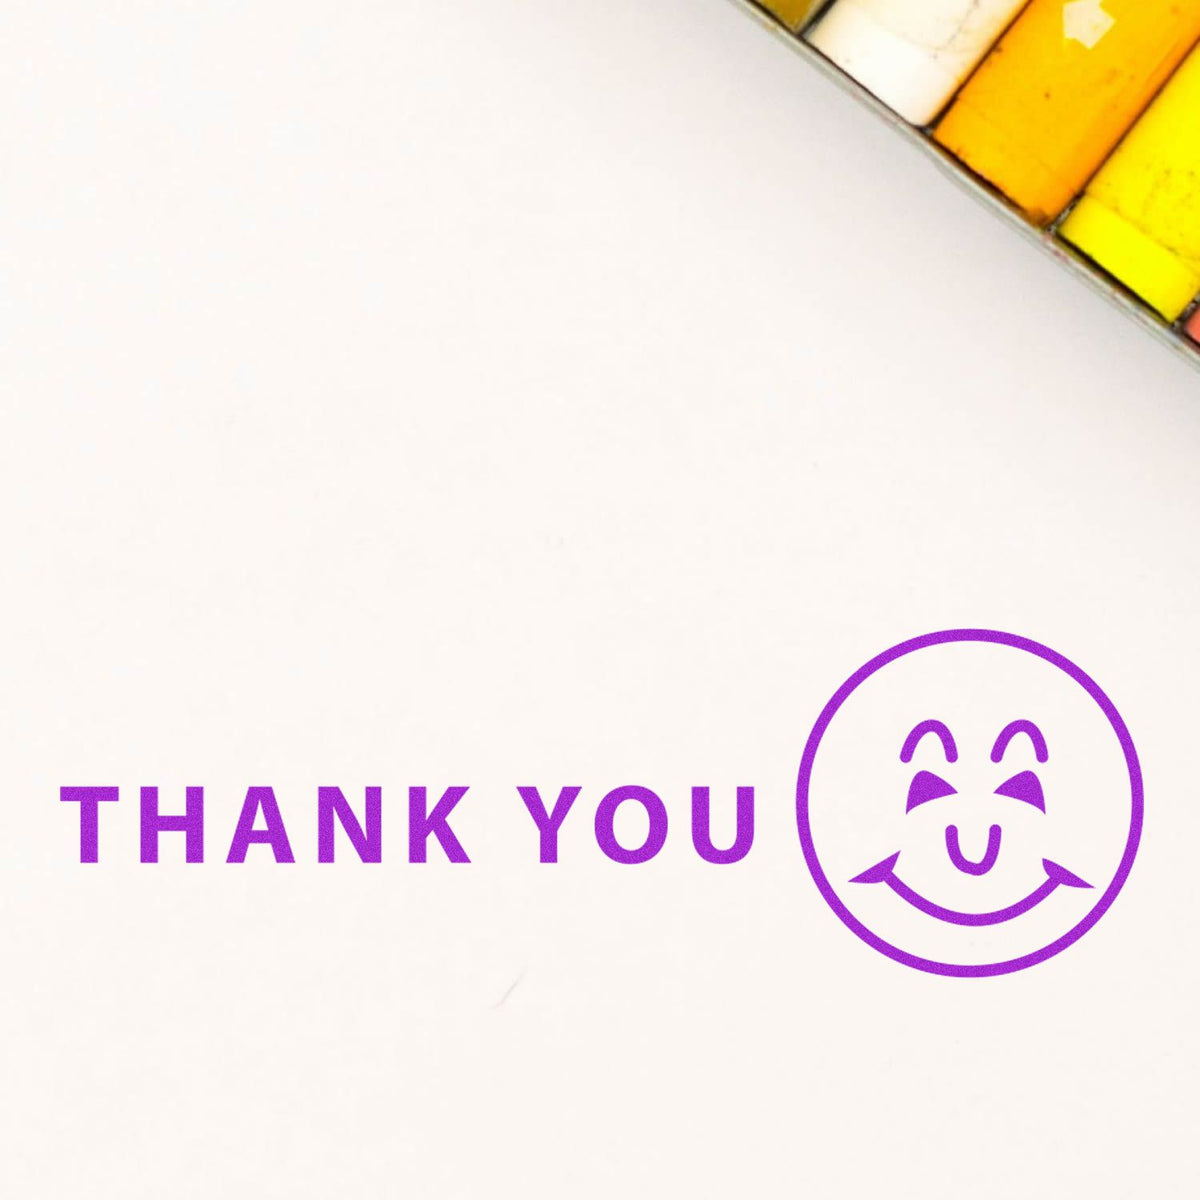 Large Thank You with Smiley Rubber Stamp In Use